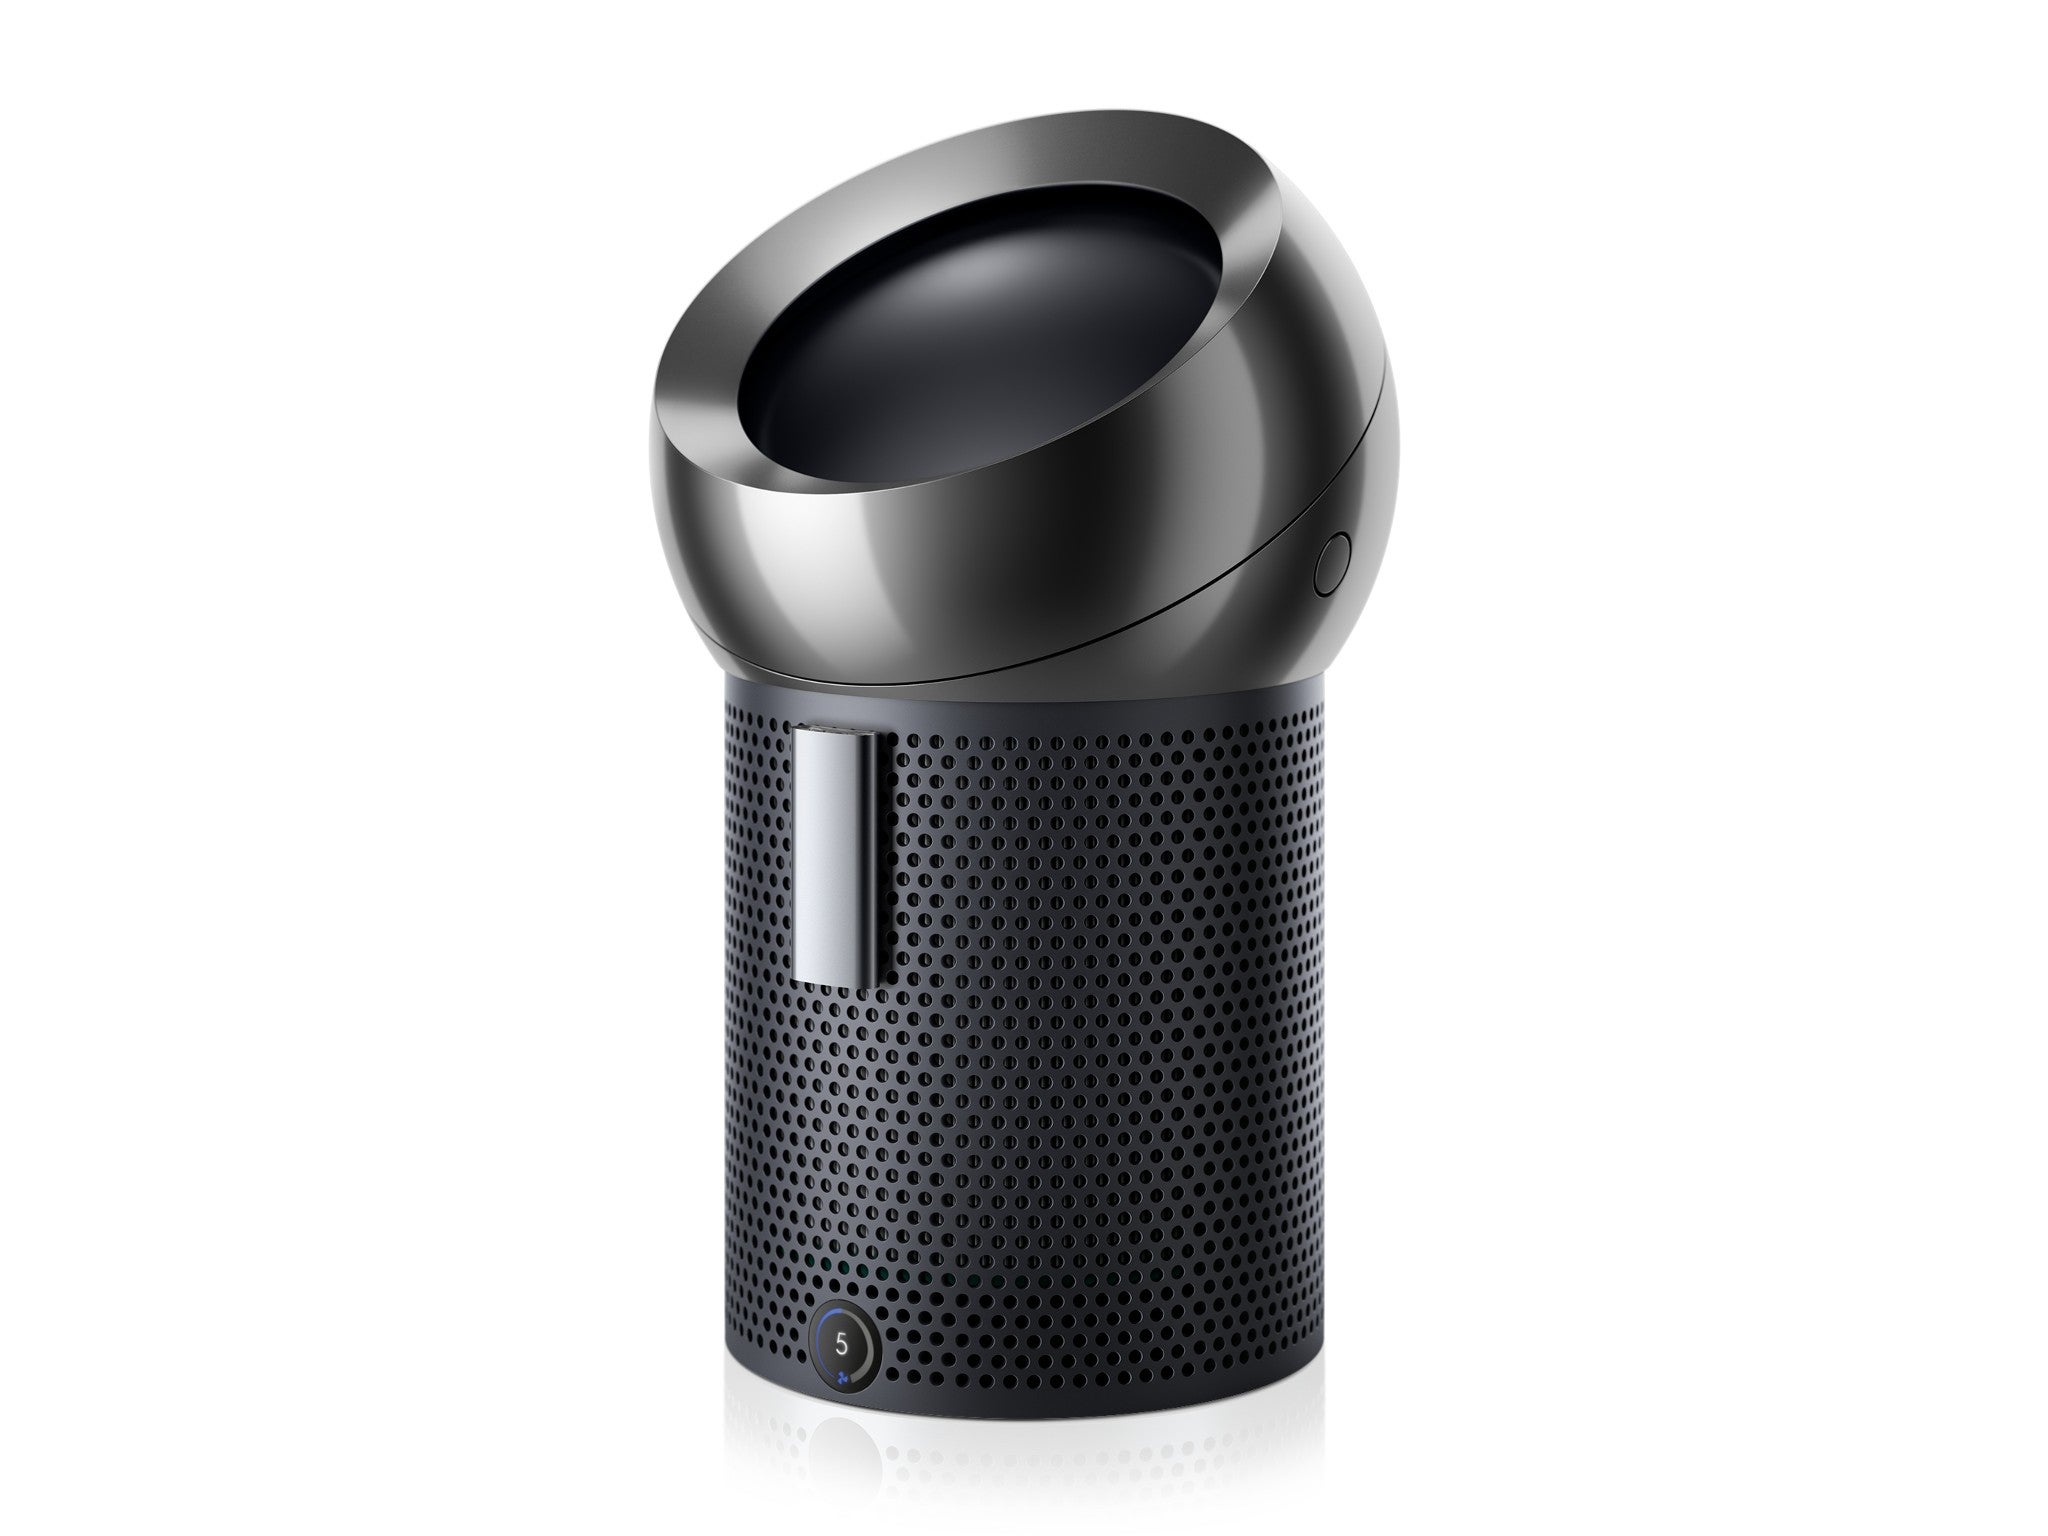 Dyson pure cool review: The small spaces and allergies | The Independent